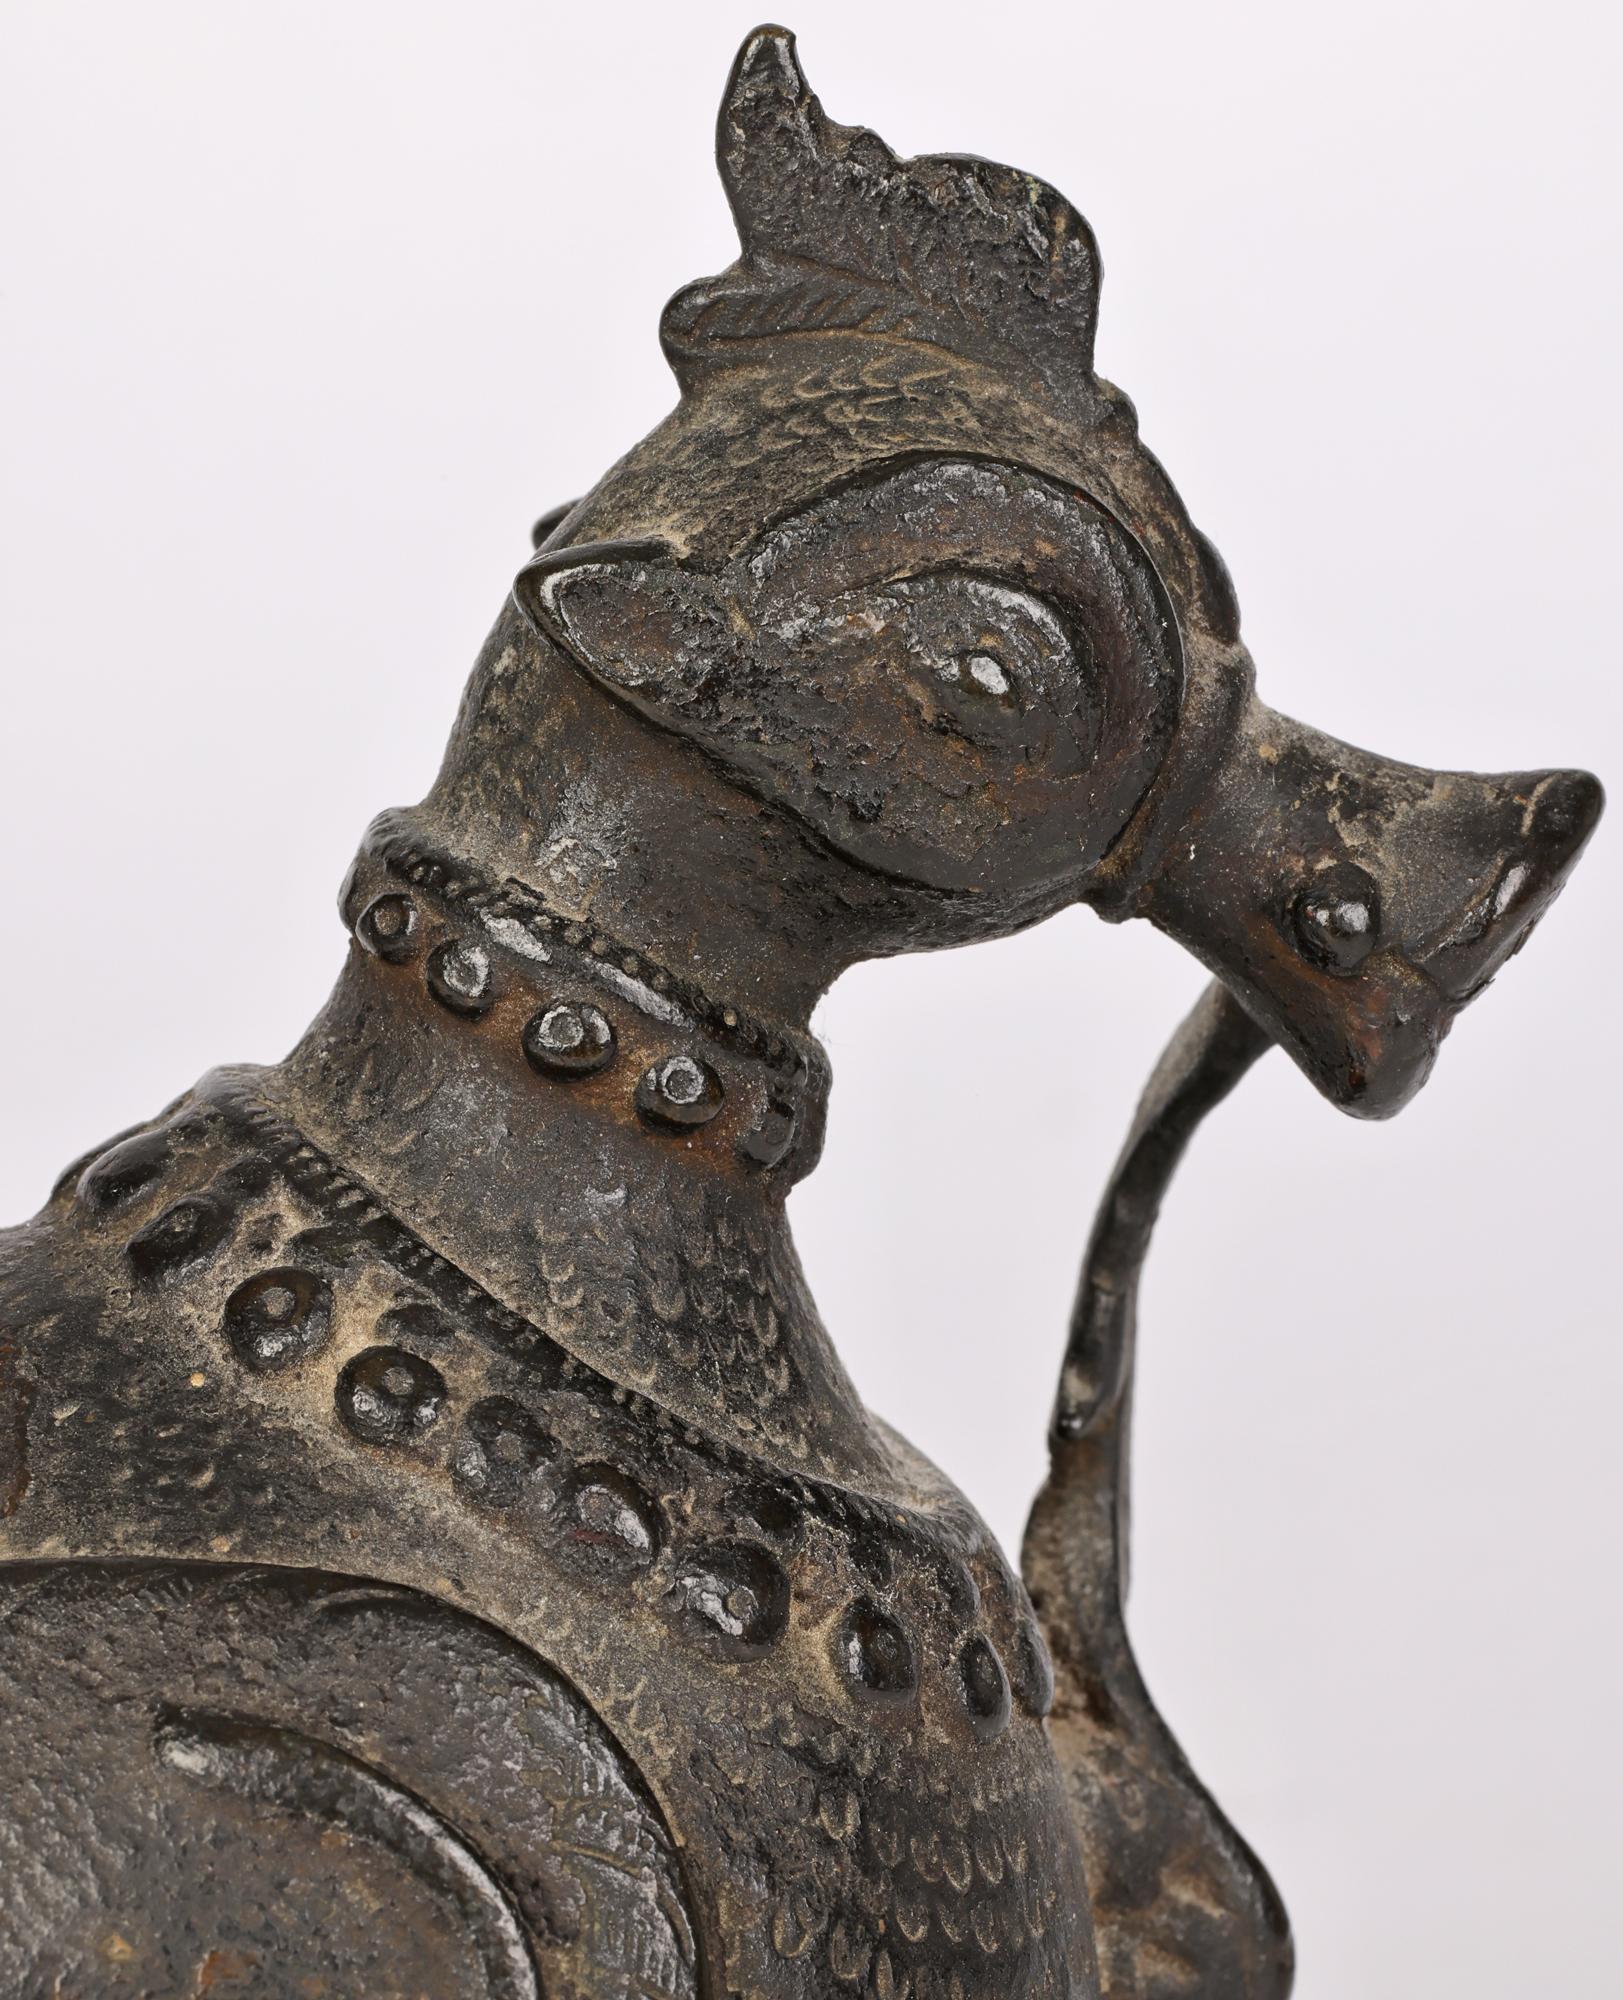 A stylish antique Khond attributed bronzed metal stylized figure of a Hamsa bird dating from the 19th or early 20th century made in Orissa, India. 

The Khonds are an indigenous Adivasi tribal community in India and produce metal sculptures in a